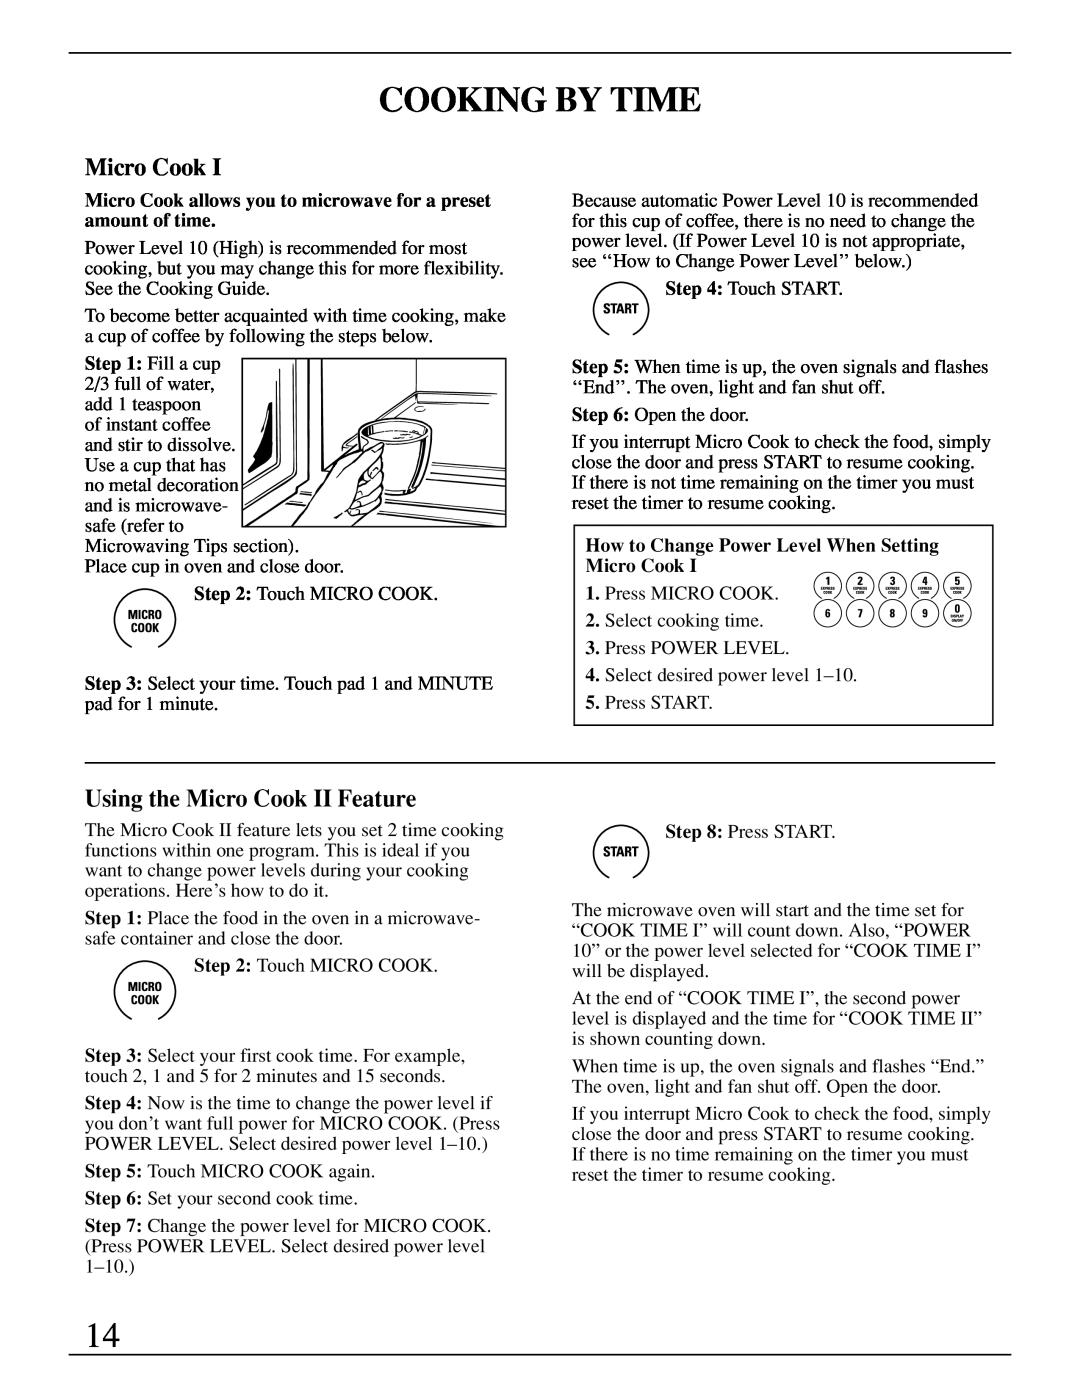 GE Monogram ZMC1095 owner manual Cooking By Time, Using the Micro Cook II Feature 